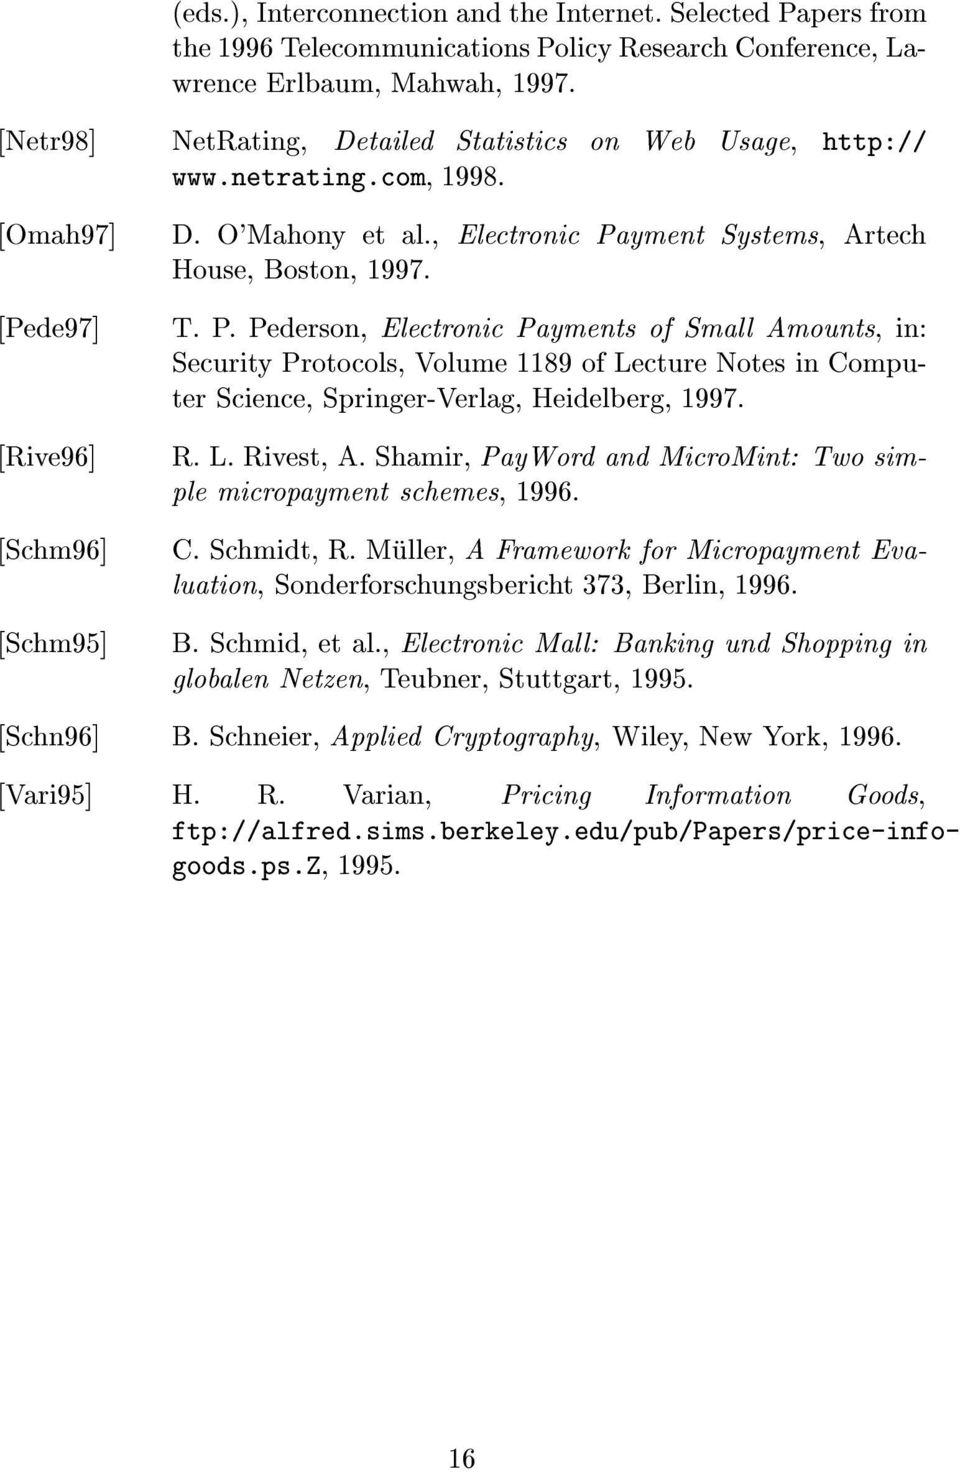 , Electronic Payment Systems, Artech House, Boston, 1997. T. P. Pederson, Electronic Payments of Small Amounts, in: Security Protocols, Volume 1189 of Lecture Notes in Computer Science, Springer-Verlag, Heidelberg, 1997.